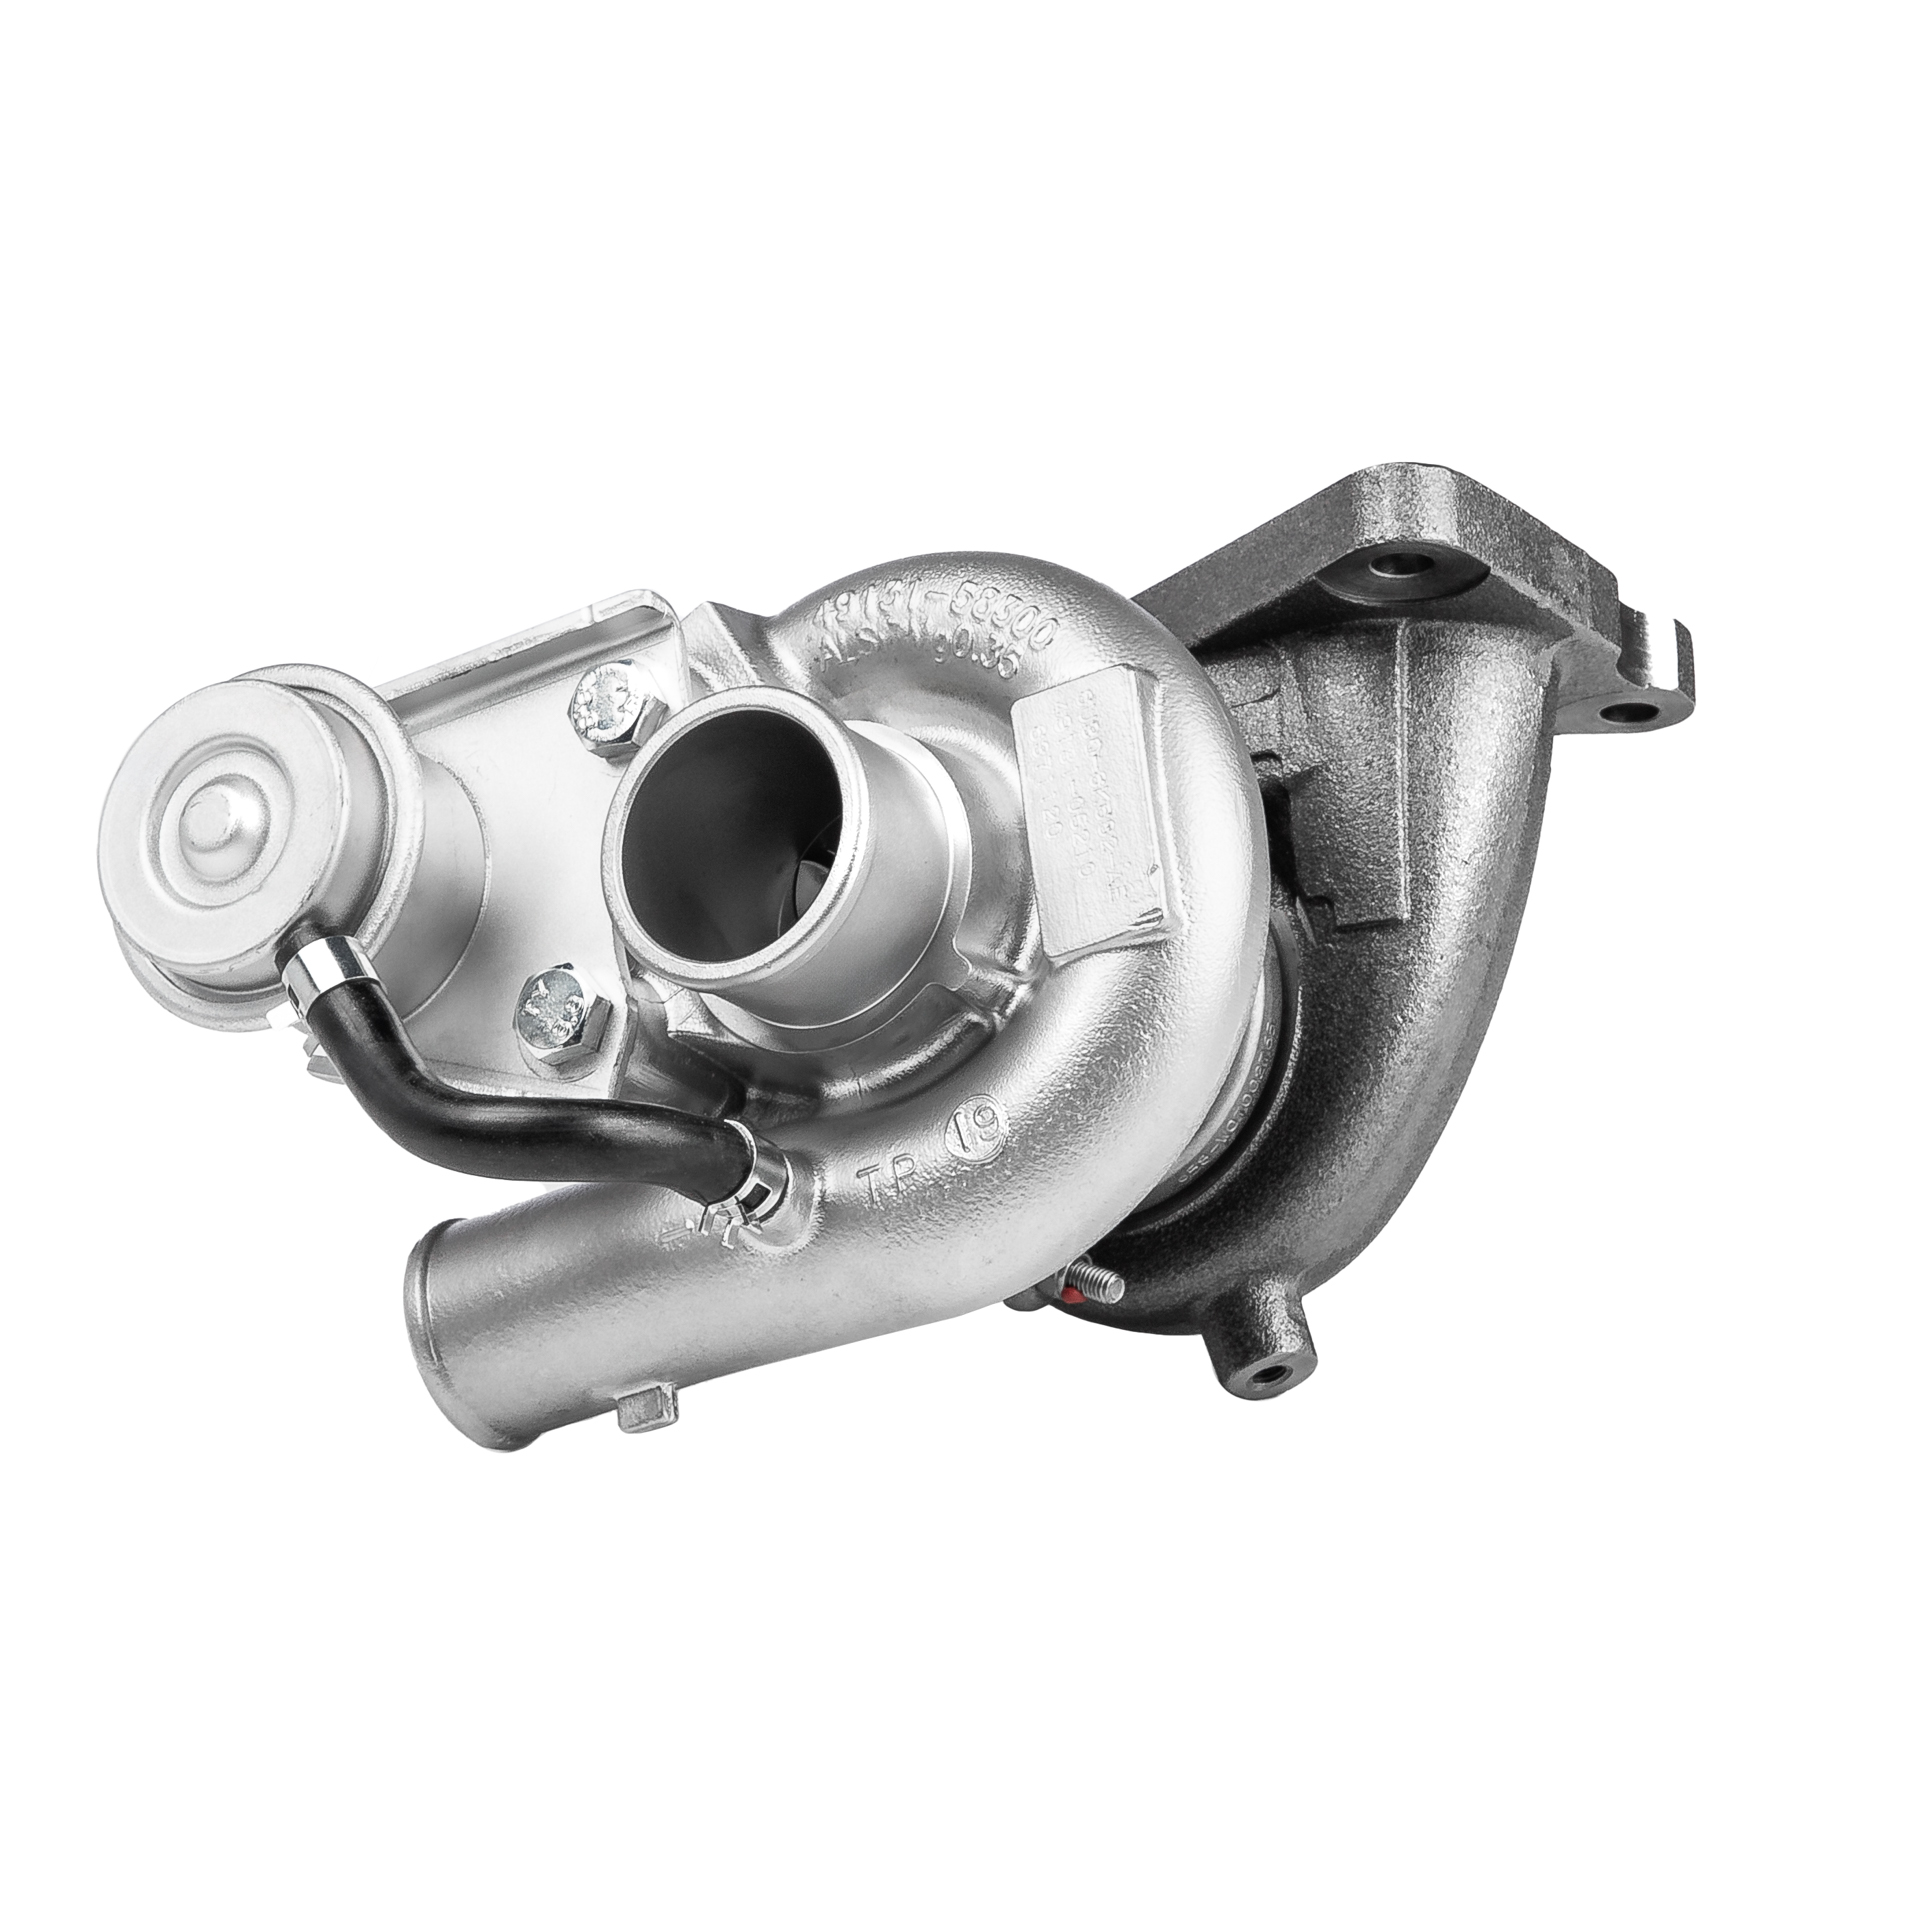 BR Turbo 49S3105212RS Turbocharger 96 5976 5280